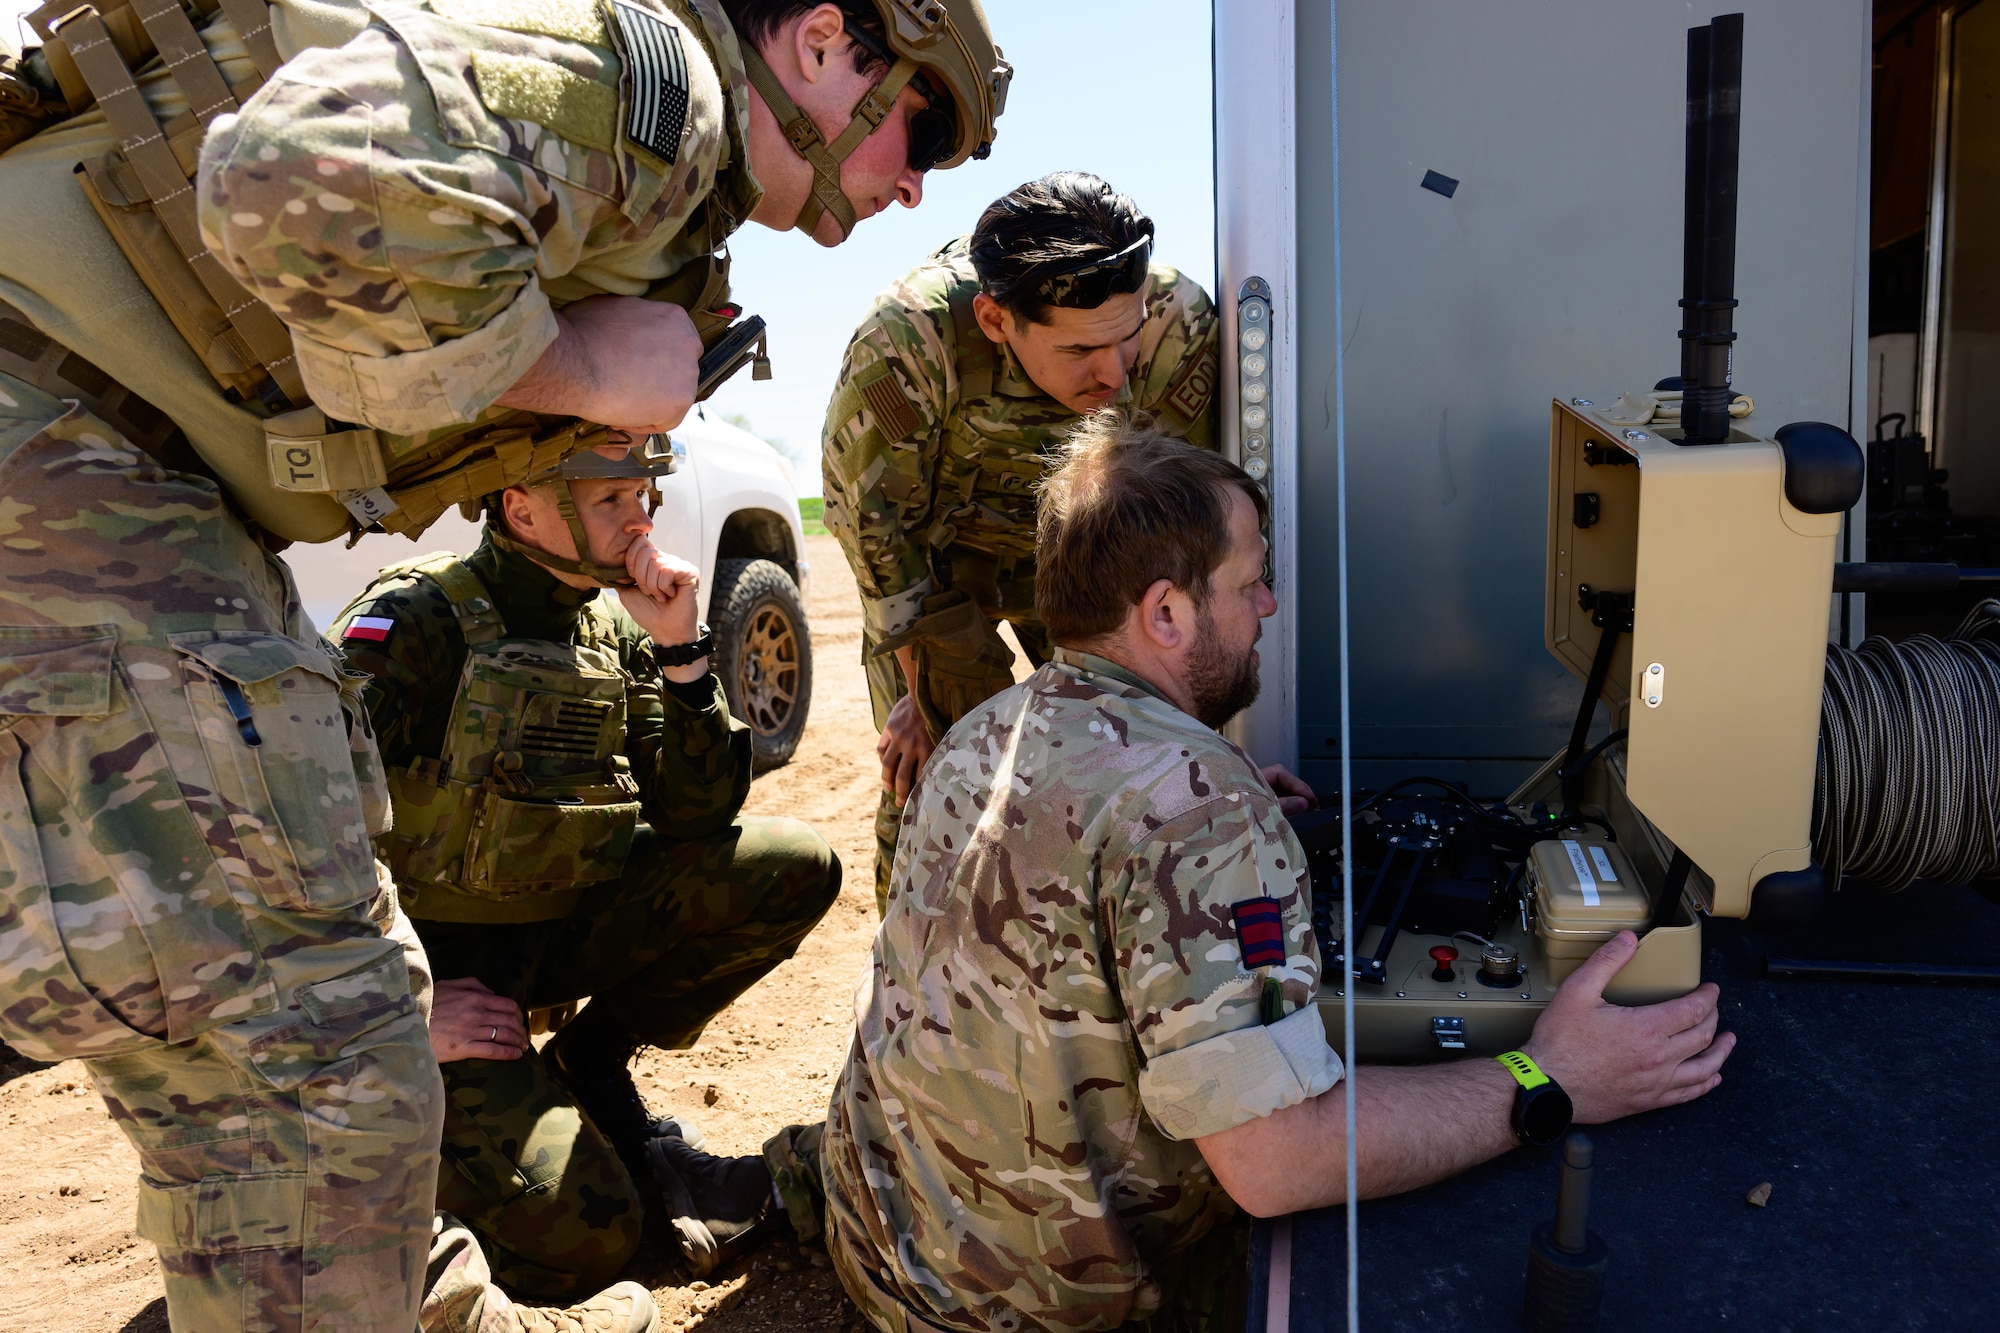 Four military members look at a piece of equipment